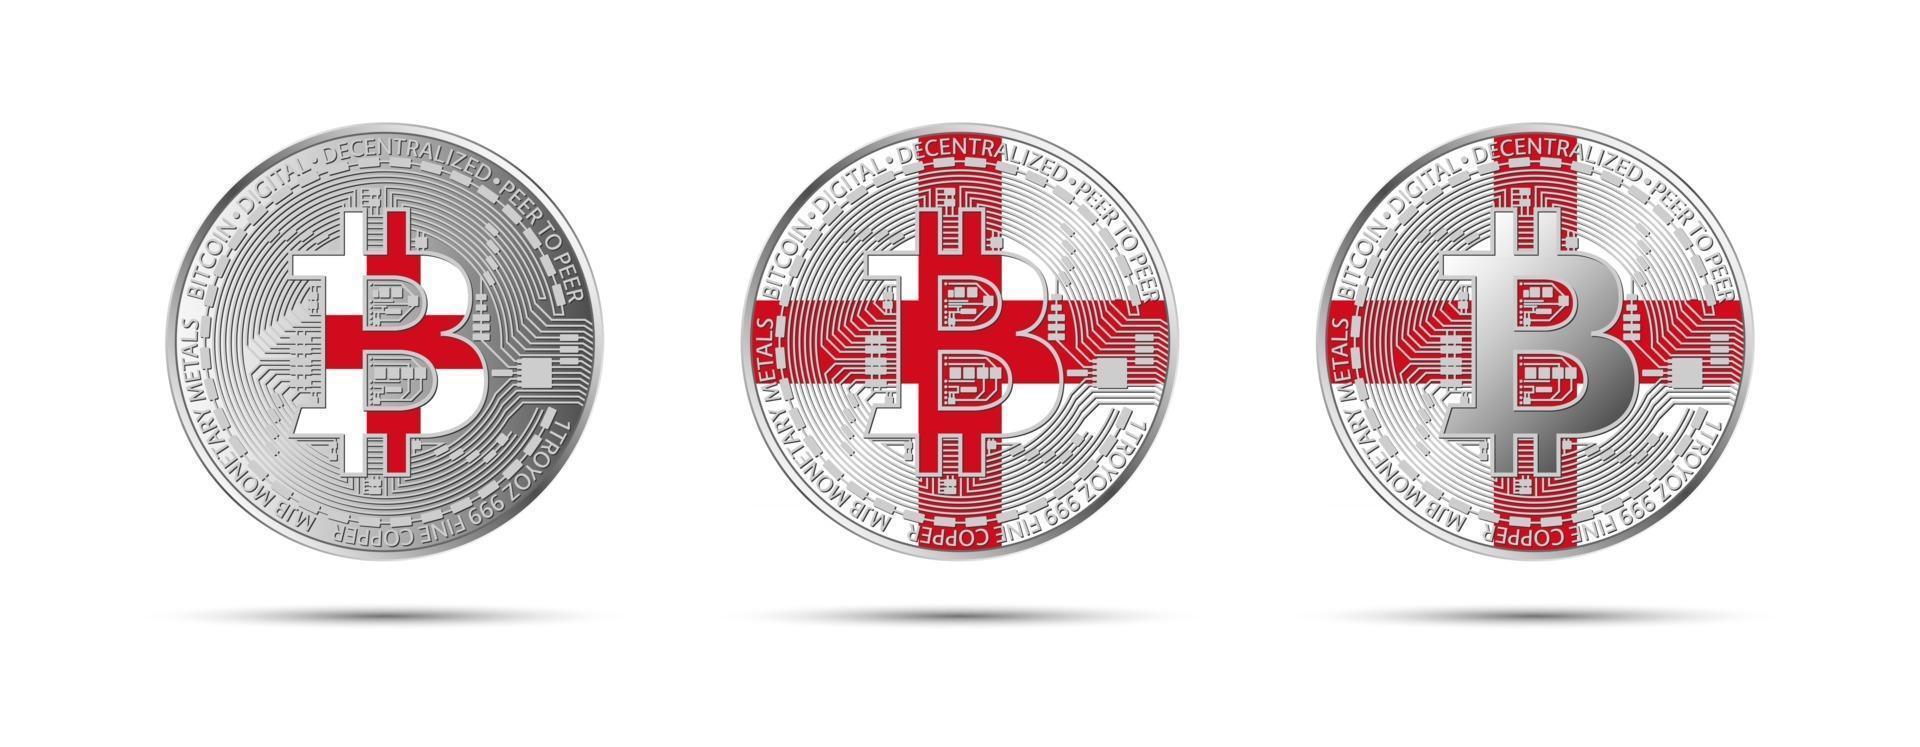 Three Bitcoin crypto coins with the flag of England Money of the future Modern cryptocurrency vector illustration